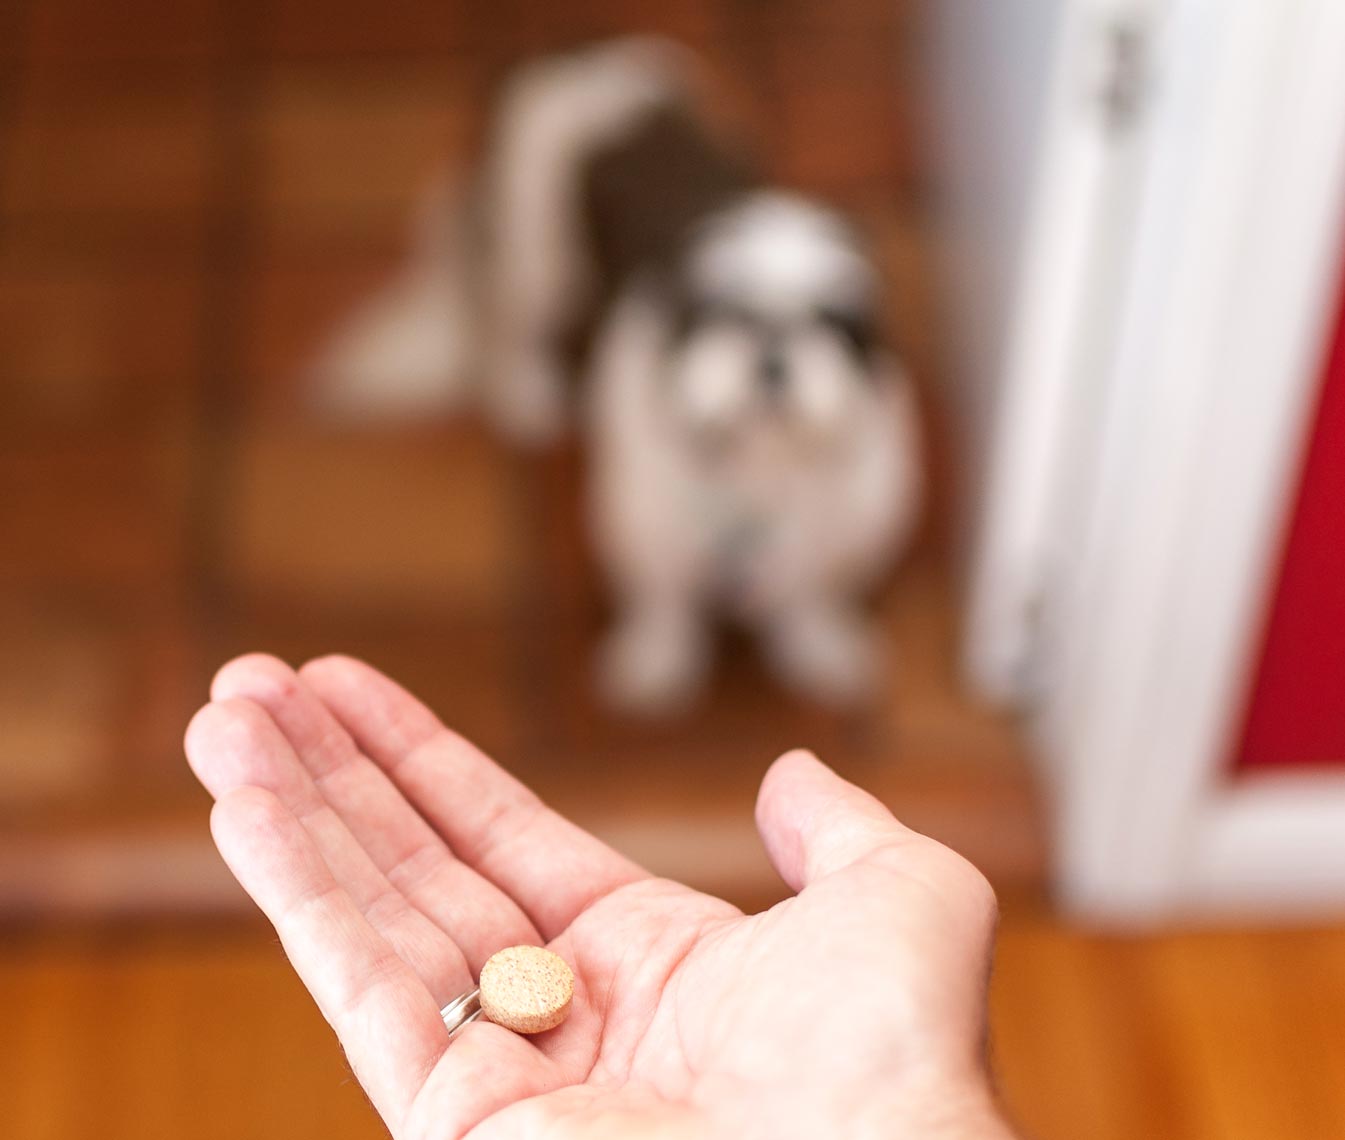 Use these tips to make it easier to give your dog medication.